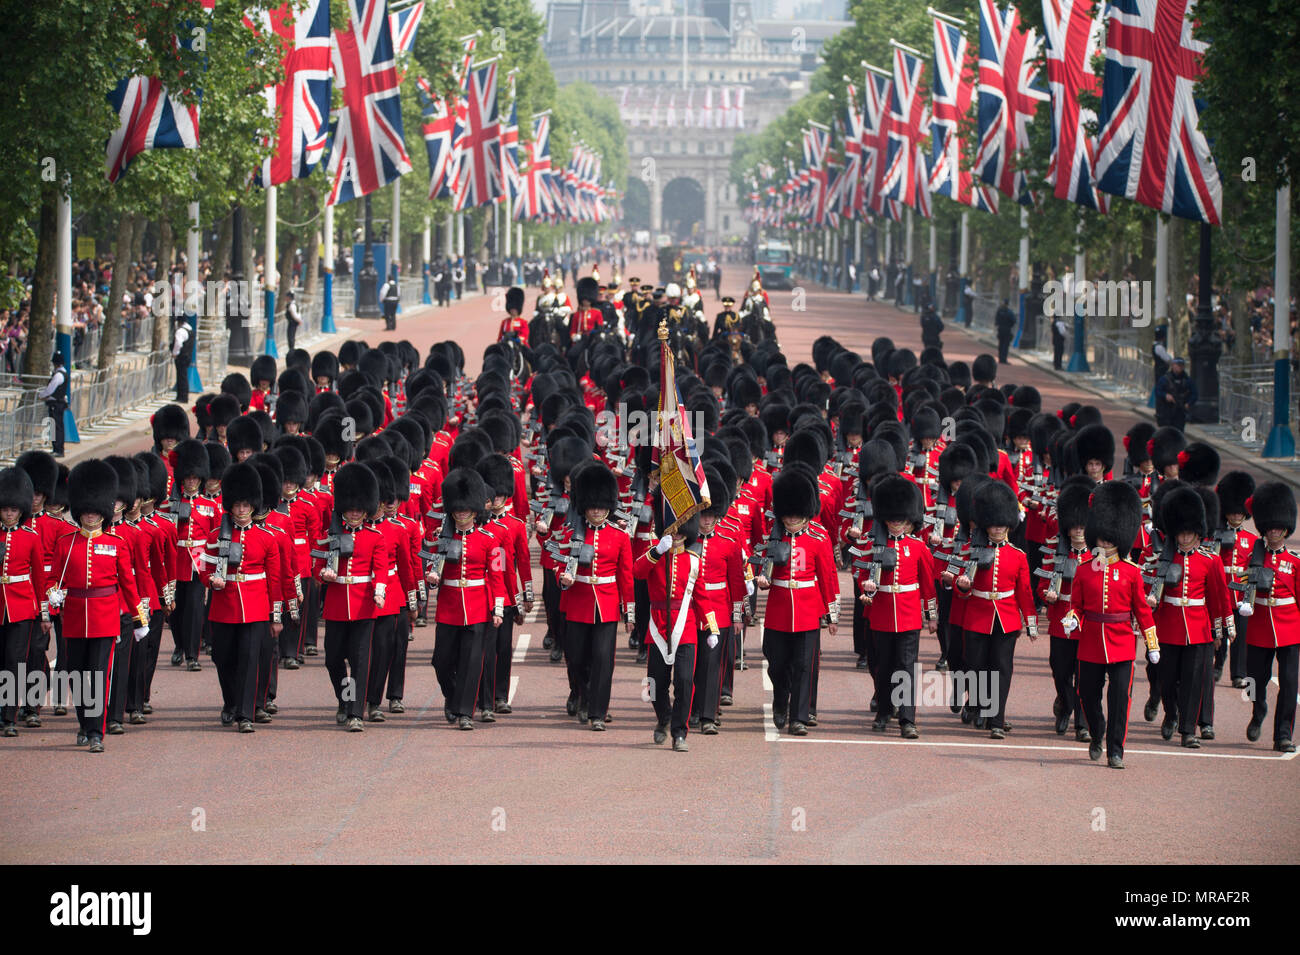 The Mall, London, UK. 26 May, 2018. Major General’s Review is held in sweltering heat, the penultimate rehearsal for the Queen’s Birthday Parade, also known as Trooping the Colour. 1400 soldiers from the Household Division and the King’s Troop Royal Horse Artillery take part in this full scale rehearsal. Credit: Malcolm Park/Alamy Live News. Stock Photo